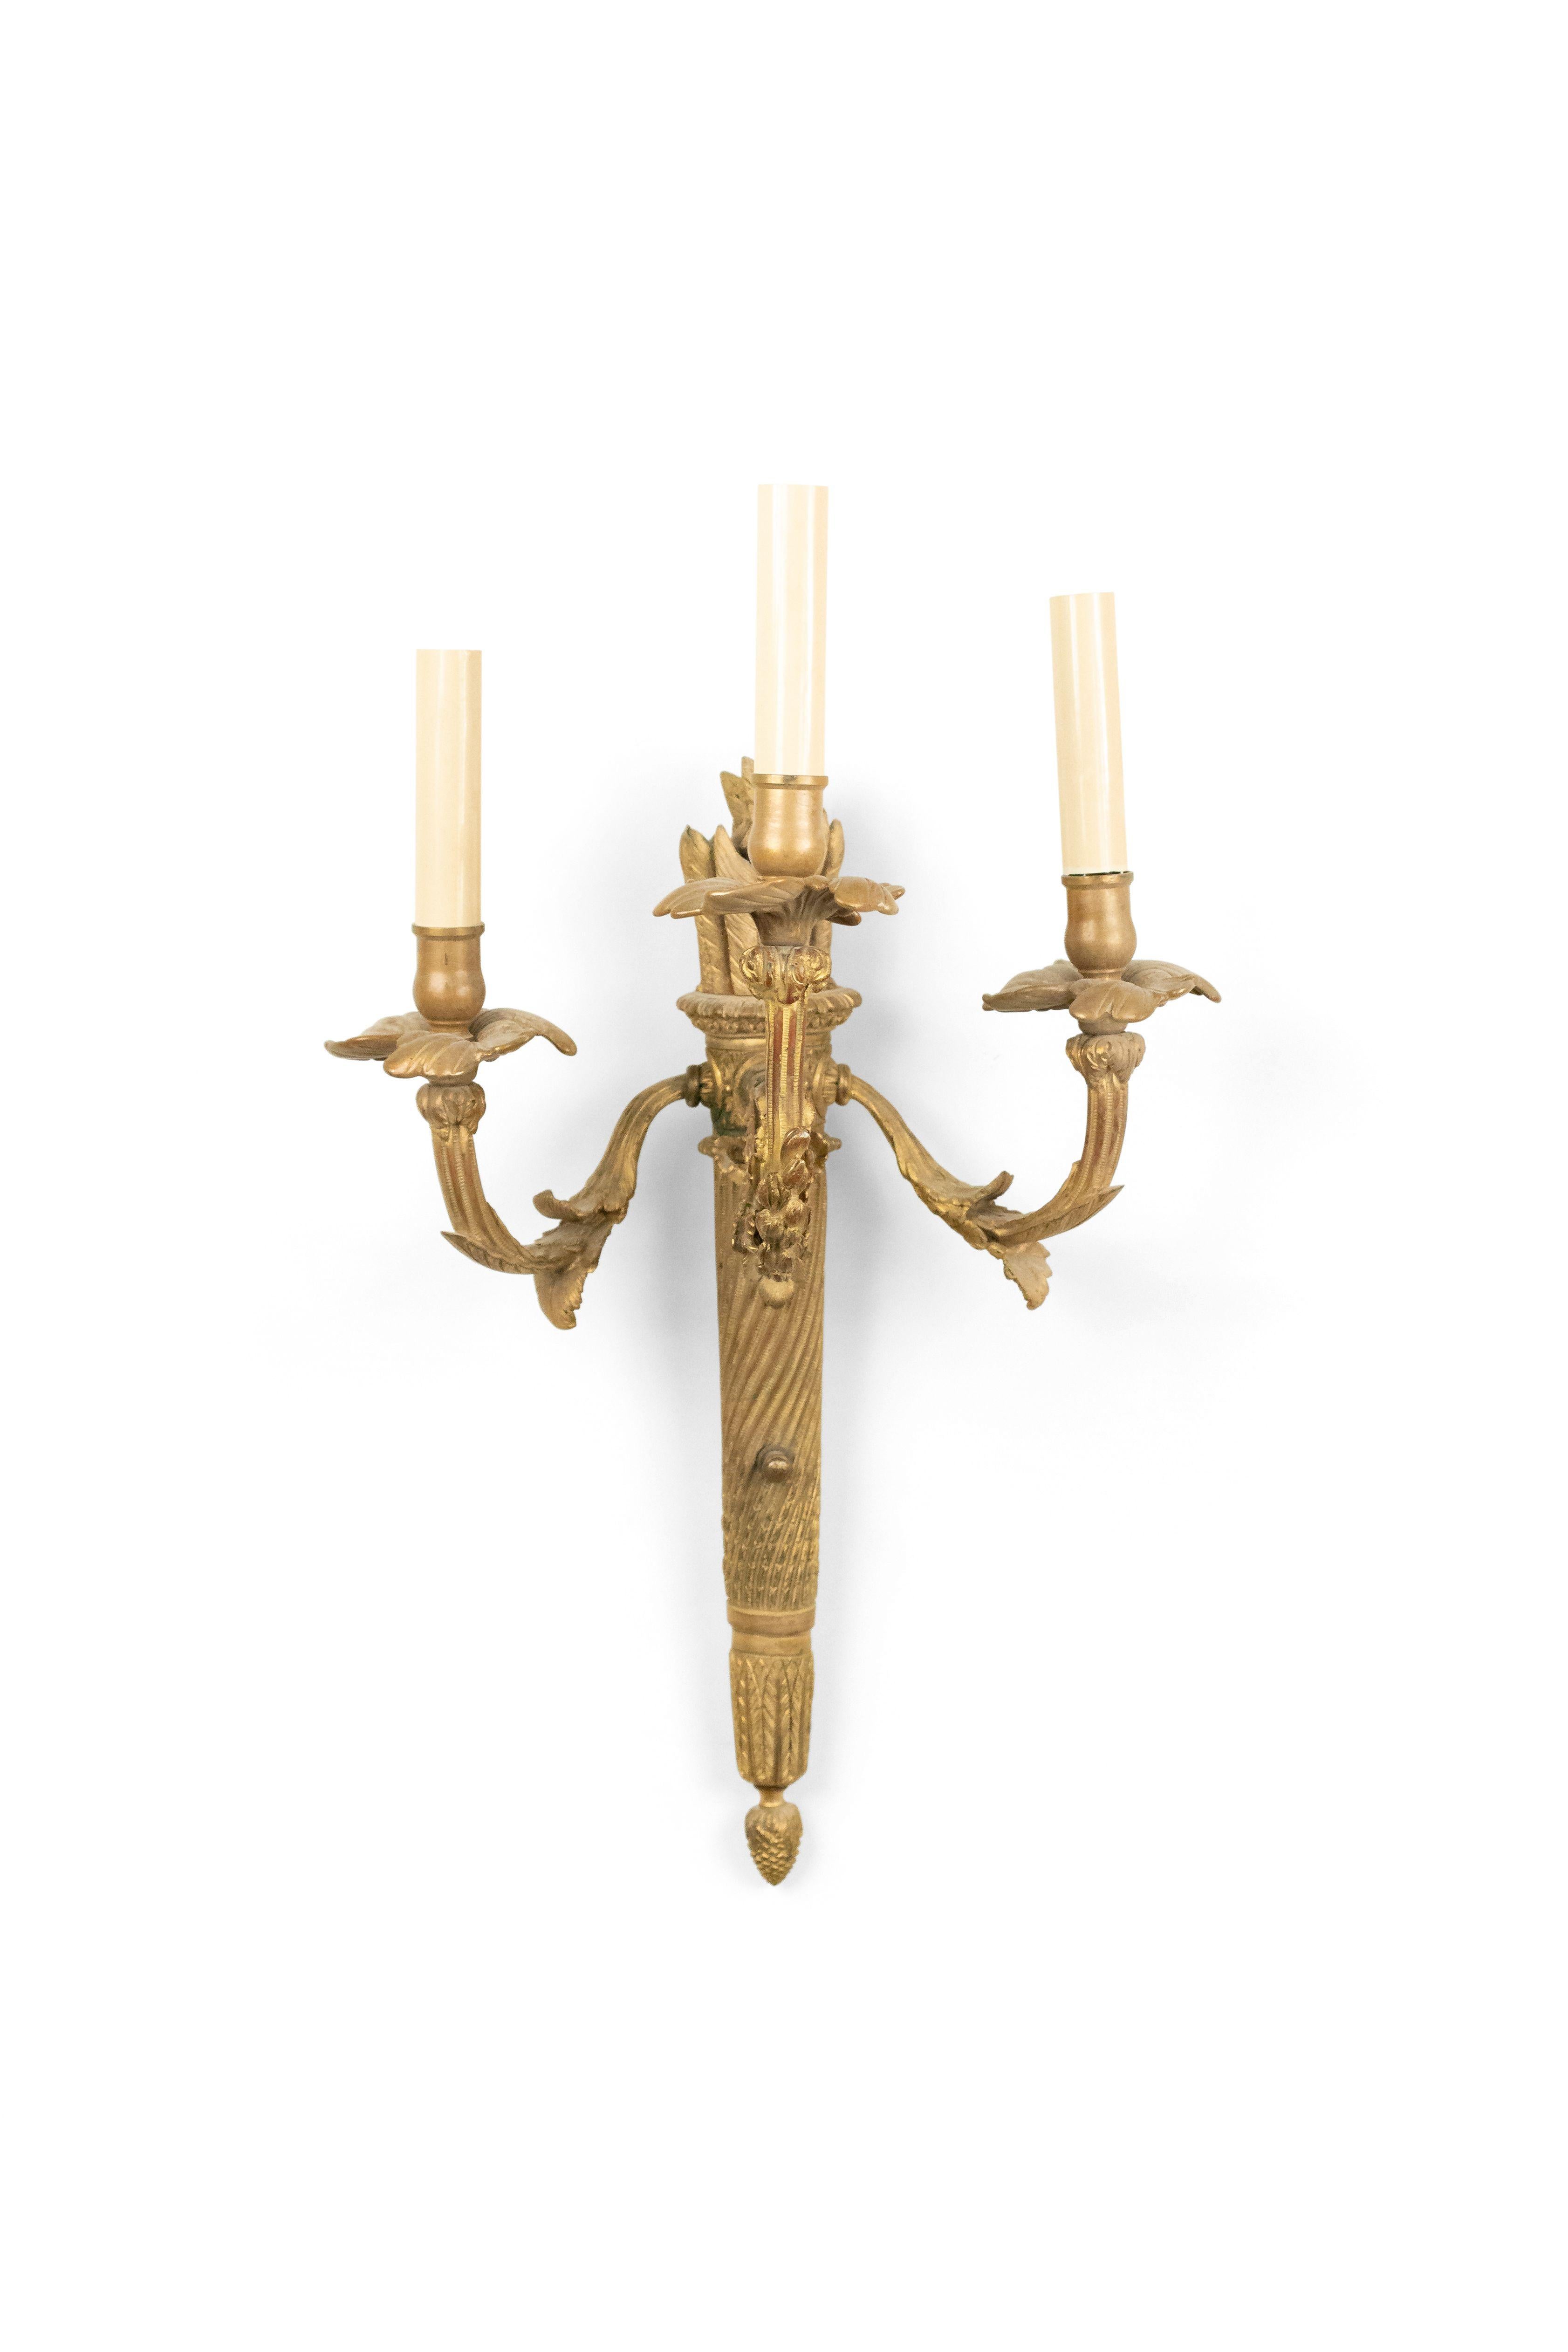 French Louis XVI Style Bronze Dore Wall Sconces For Sale 3